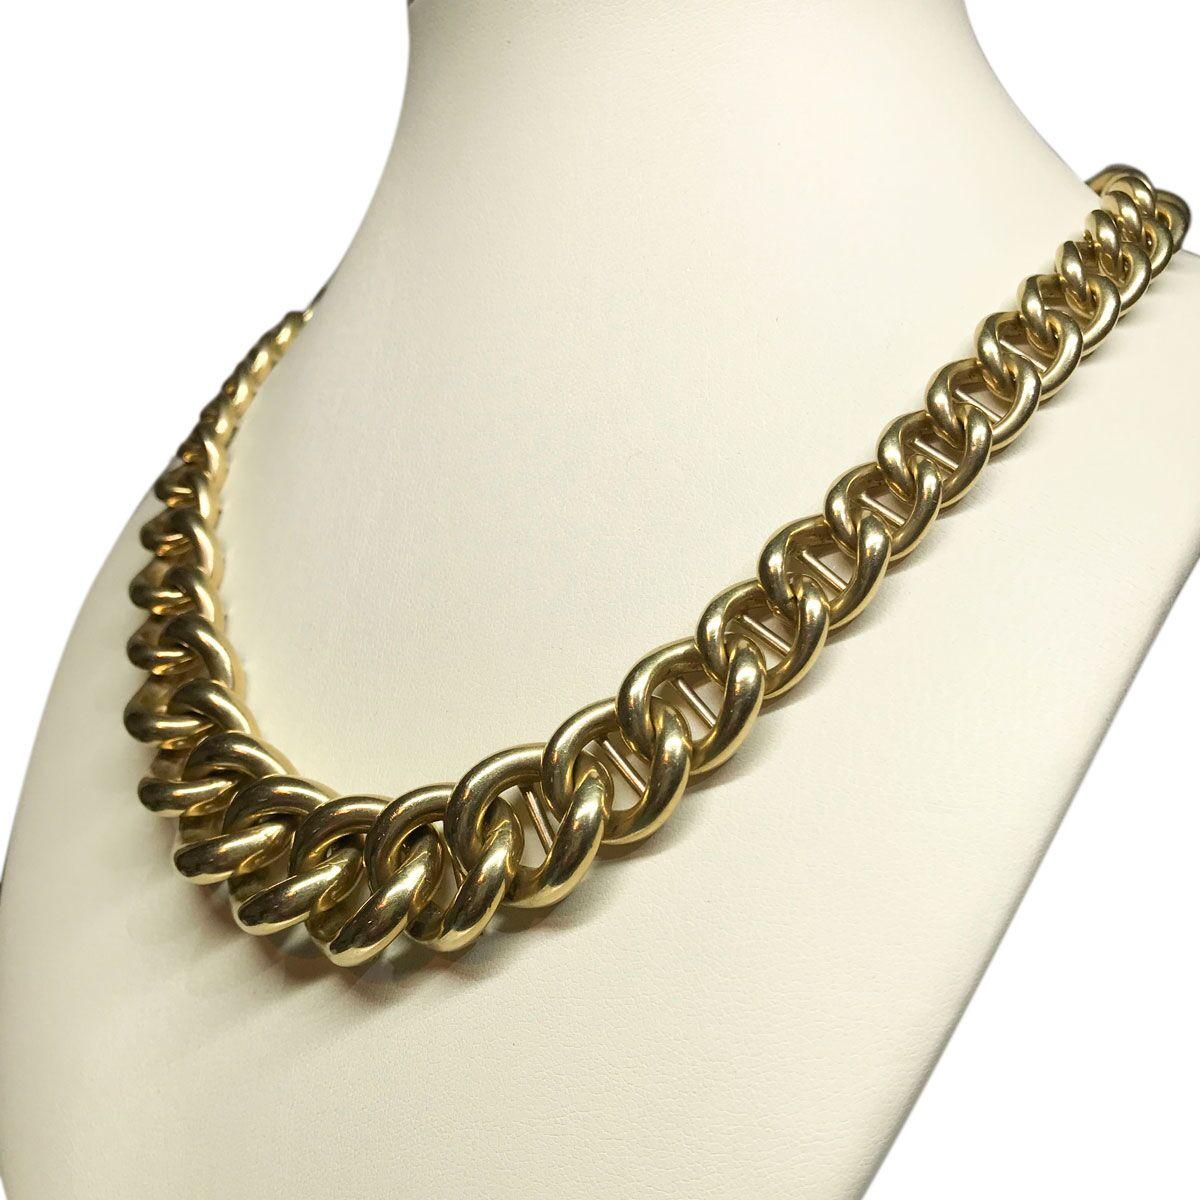 Every jewellery wardrobe should have a wonderful gold curb link chain necklace, a must for every style and every outfit. This one surely fits the bill, with its beautifully crafted links in soft buttery 18k yellow gold that gently graduate from the